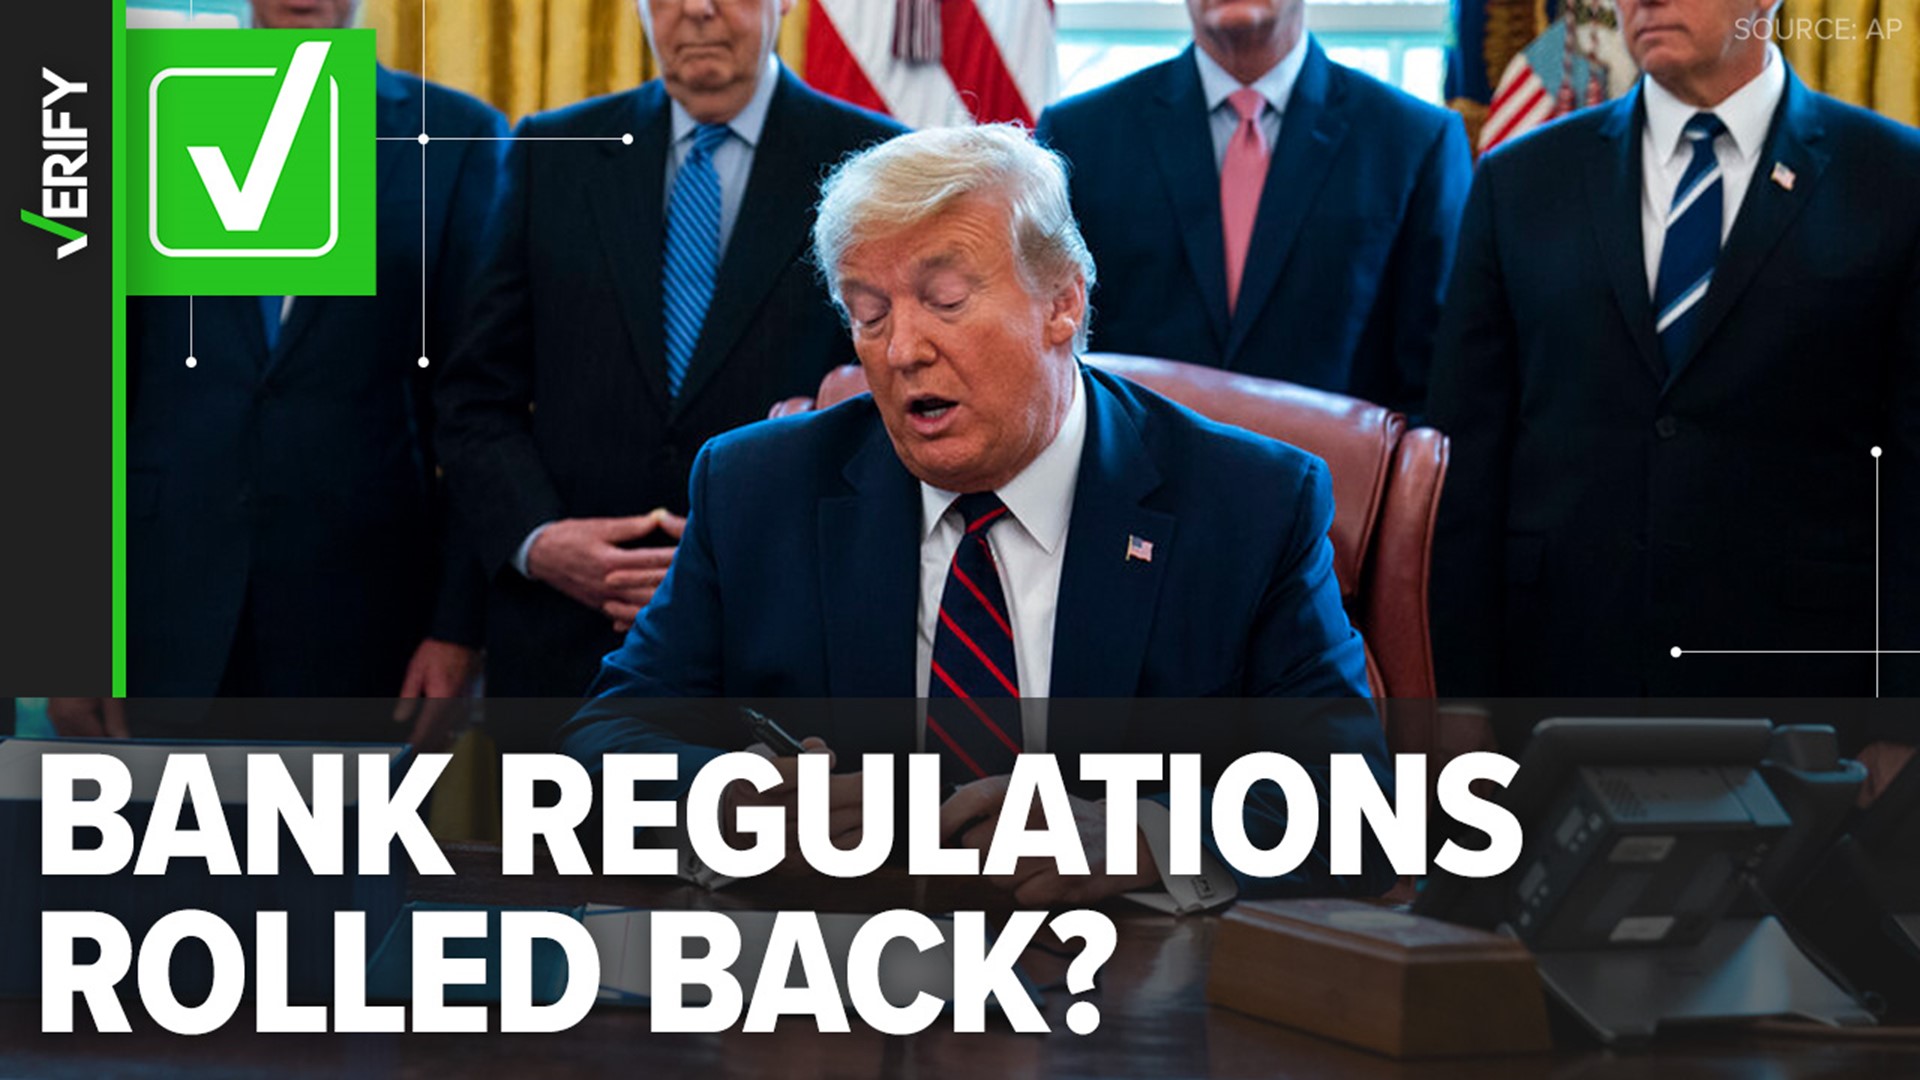 Former President Trump signed a law that rolled back regulations for some banks. But the original rules may not have prevented the SVB and Signature Bank failures.